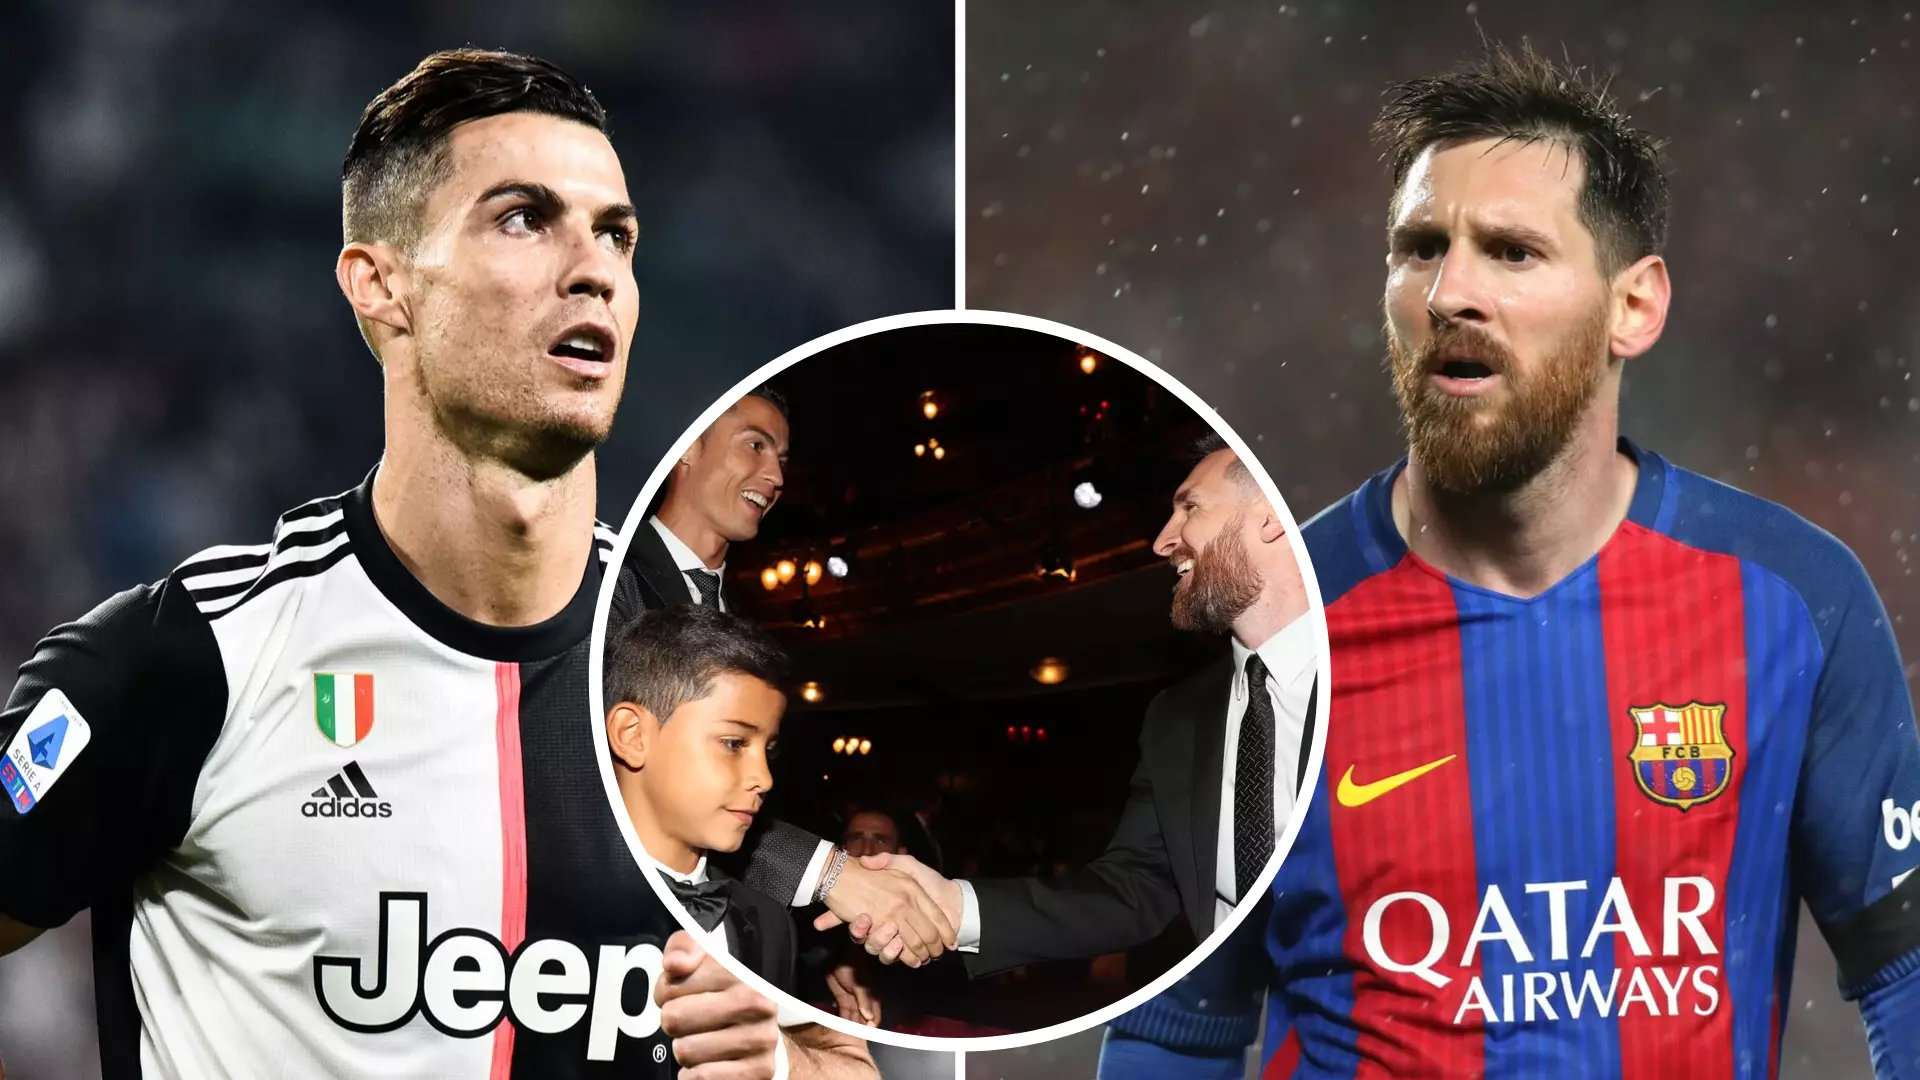 Lionel Messi On Cristiano Ronaldo: 'People Think The Rivalry Goes Beyond Football, But It Doesn’t'